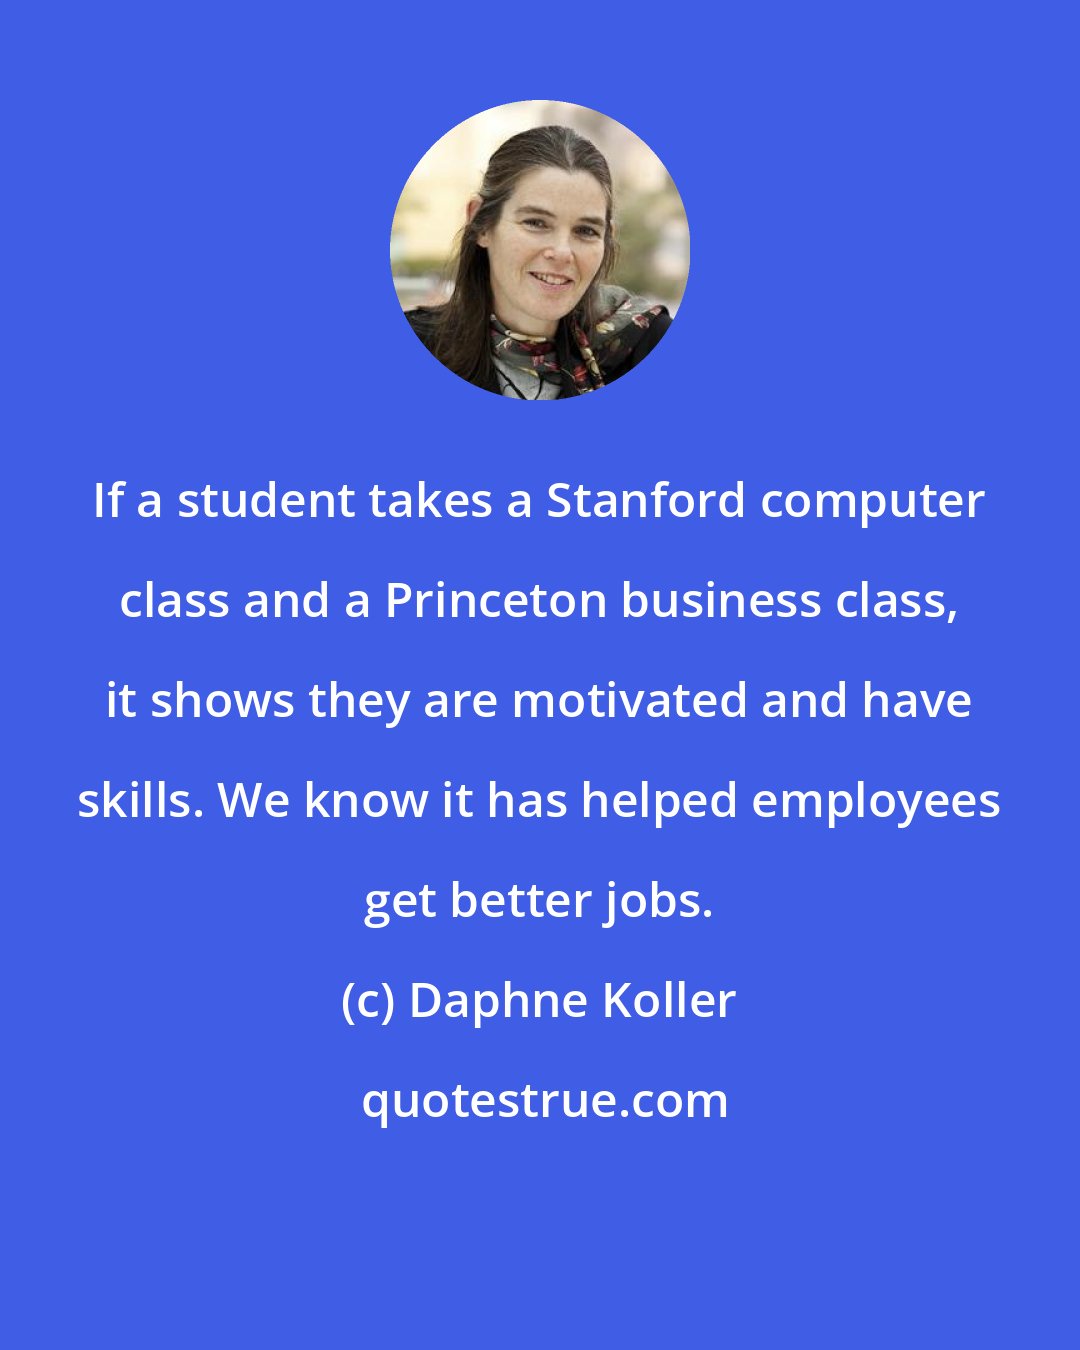 Daphne Koller: If a student takes a Stanford computer class and a Princeton business class, it shows they are motivated and have skills. We know it has helped employees get better jobs.